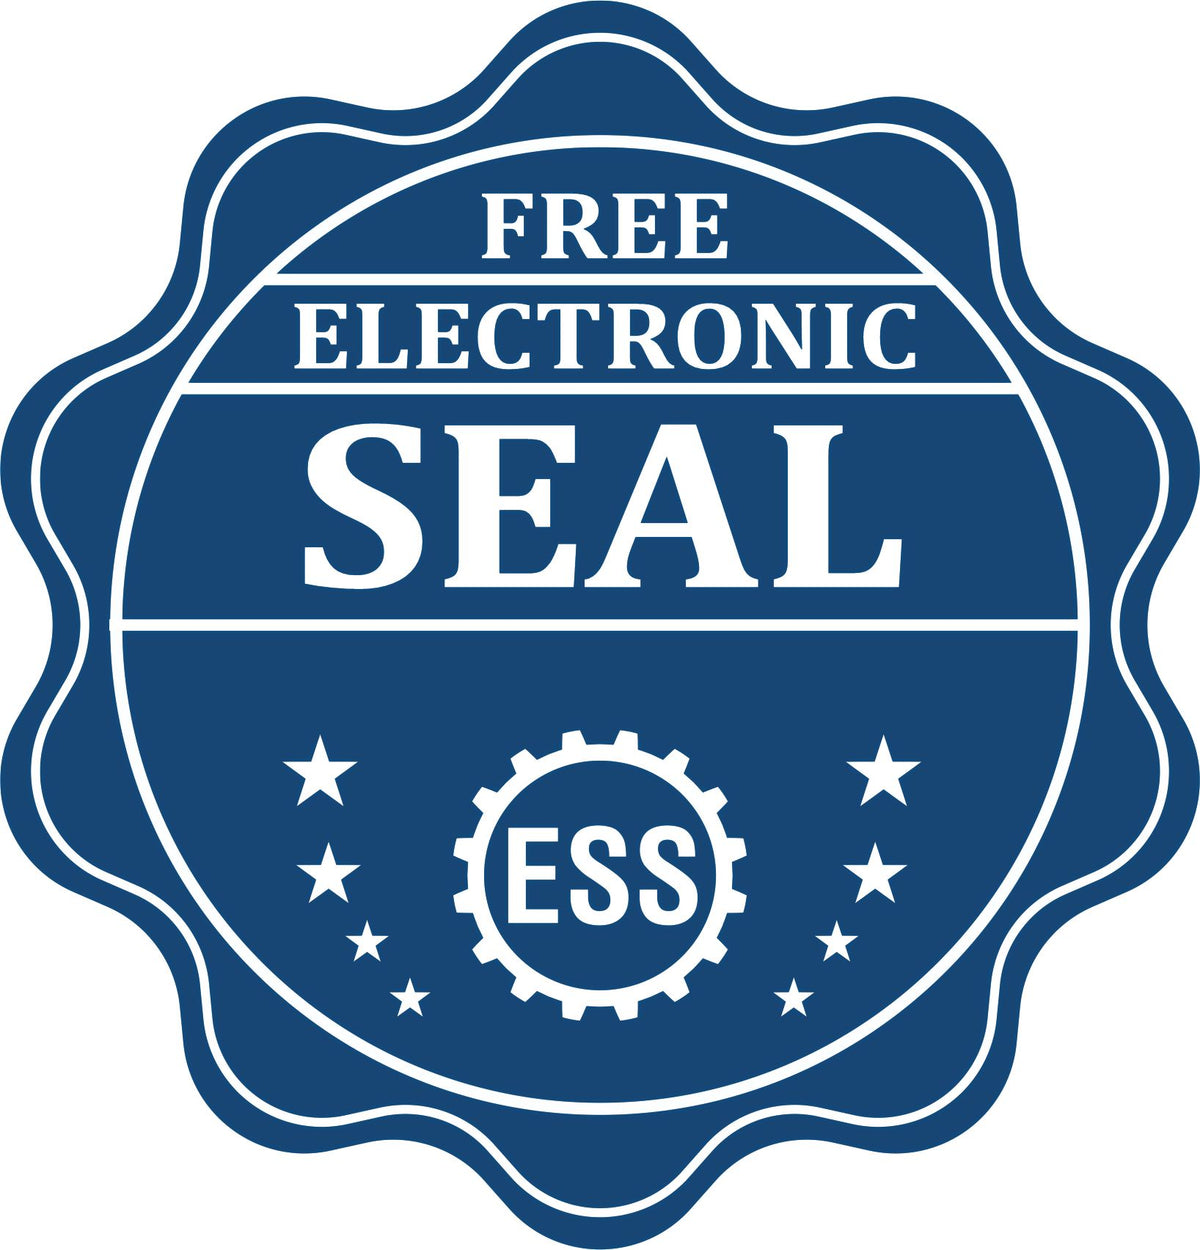 A badge showing a free electronic seal for the State of Michigan Extended Long Reach Engineer Seal with stars and the ESS gear on the emblem.